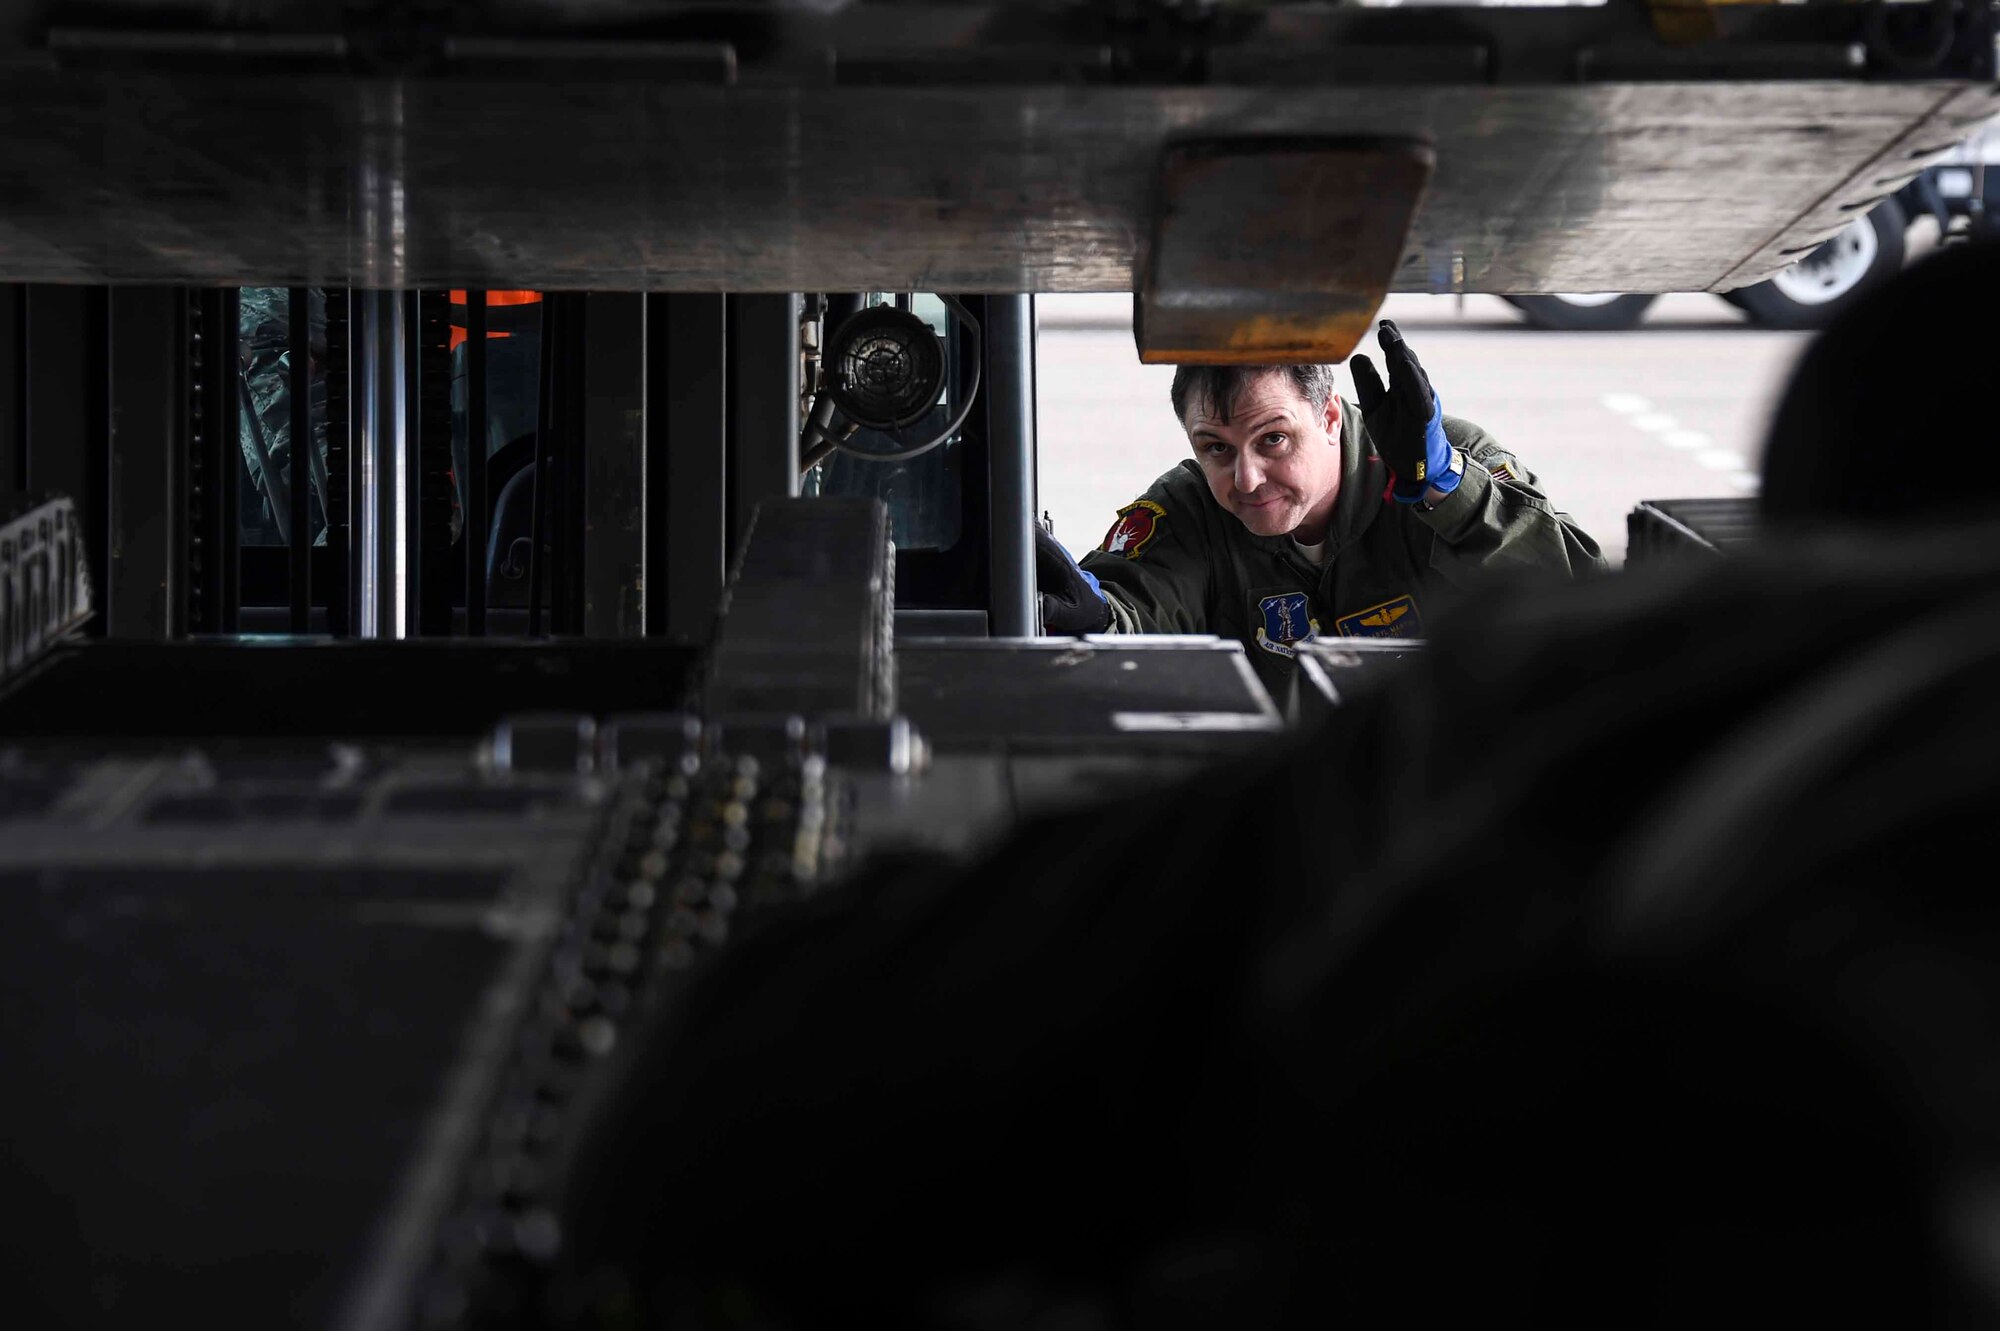 U.S. Air Force Master Sgt. Daryl Martini, New York Air National Guard’s 105th Airlift Wing load master, helps load a C-17 Globemaster III at the Fresno Air National Guard Base, Jan. 21, 2016, in support of the 144th Fighter Wing’s participation in Red Flag 16-01. Red Flag is a realistic combat training exercise, which is hosted by Nellis Air Force Base, Nevada and the U.S. Air Force Warfare Center. The 105th AW airlifted 12 pallets and 29 personnel assigned to the 144th FW. (U.S. Air National Guard Senior Airman Klynne Pearl Serrano)